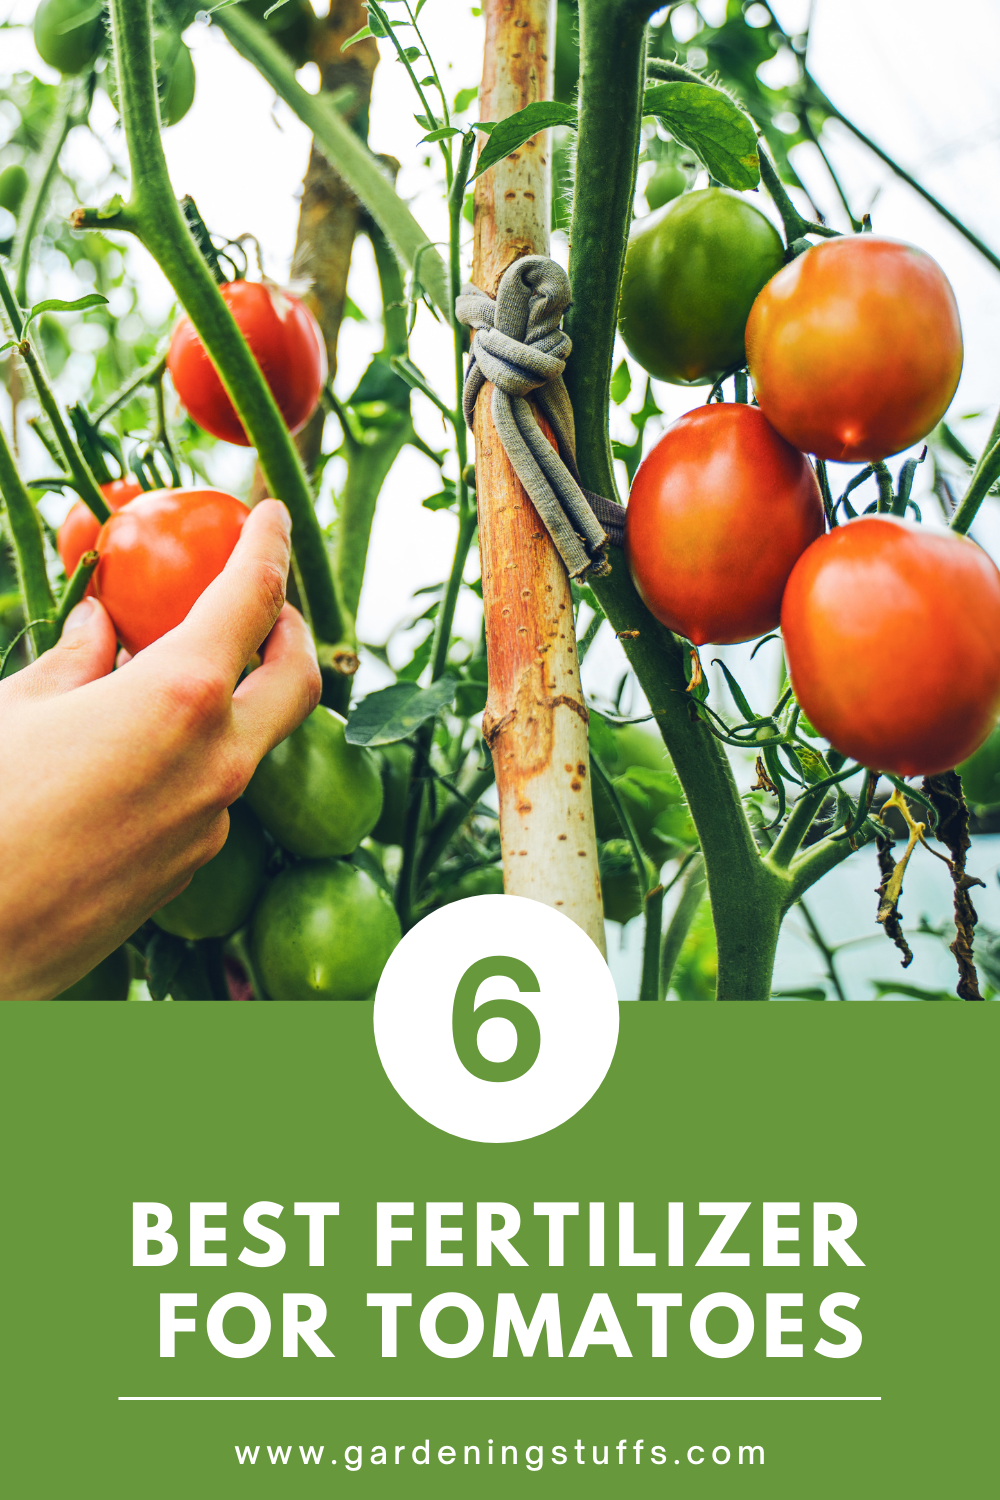 Have you ever tried growing tomato plants but struggled to get them to produce tomatoes of a good size and quality? Read on and discover the best fertilizers for tomatoes, along with tips on what to look out for.